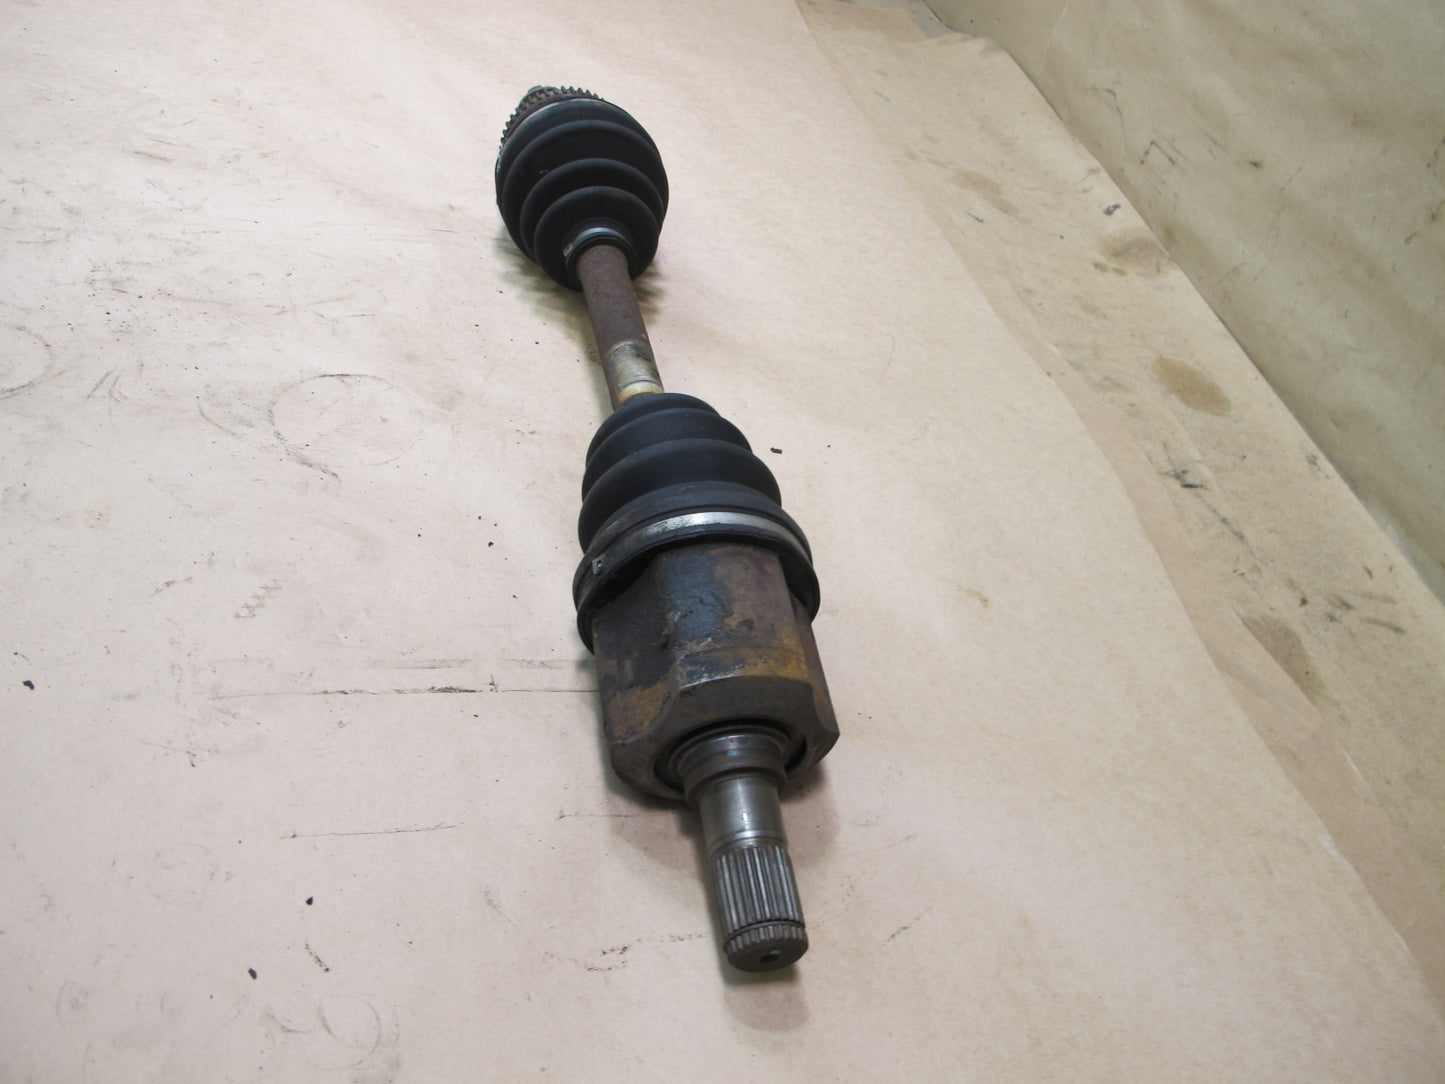 1991-1992 DODGE STEALTH 3000GT VR4 TURBO AWD FRONT RIGHT SUSPENSION AXLE SHAFT